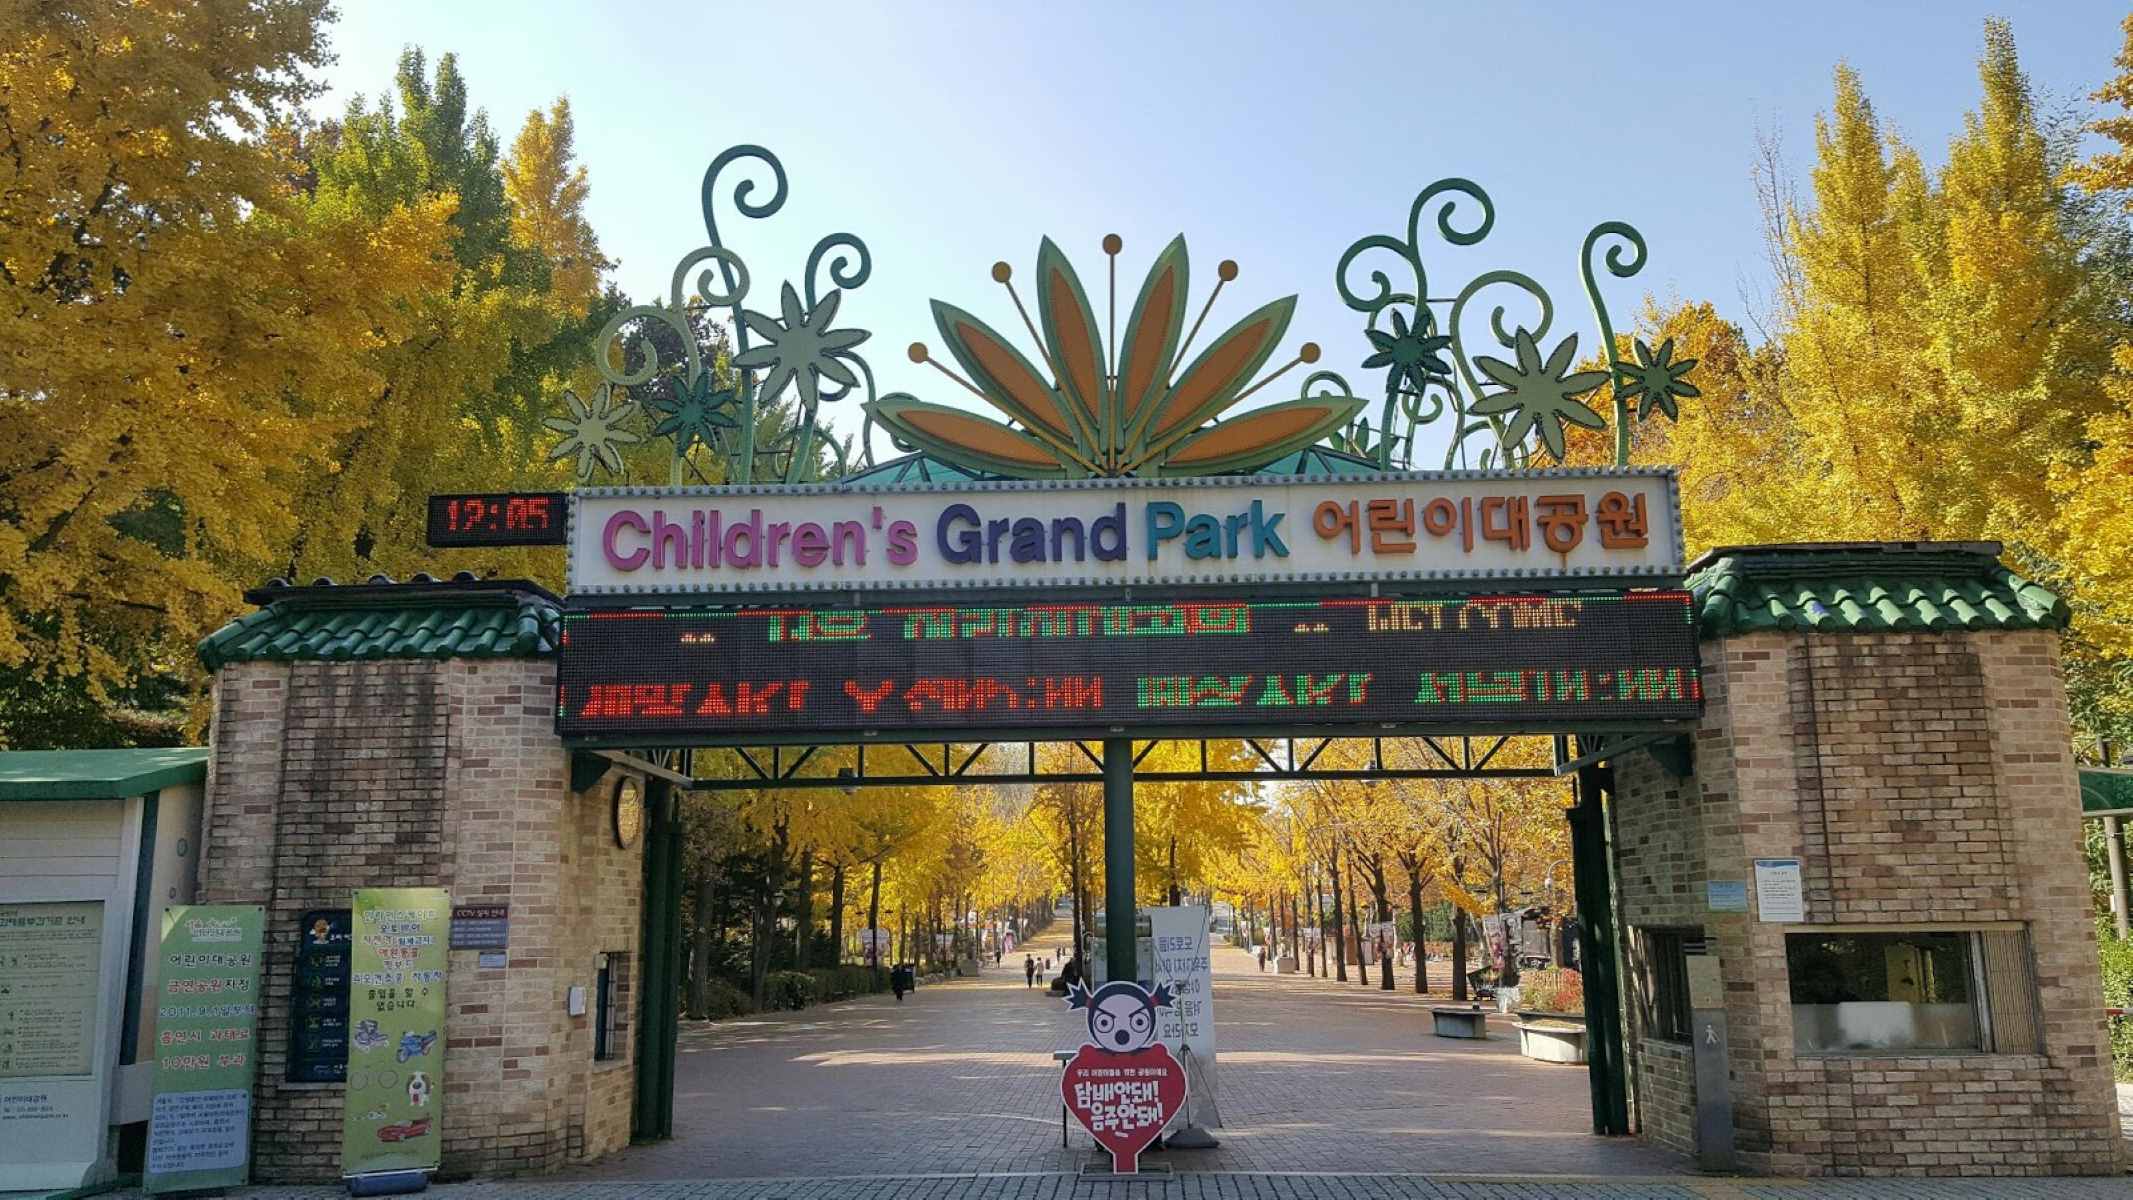 19-astonishing-facts-about-childrens-grand-park